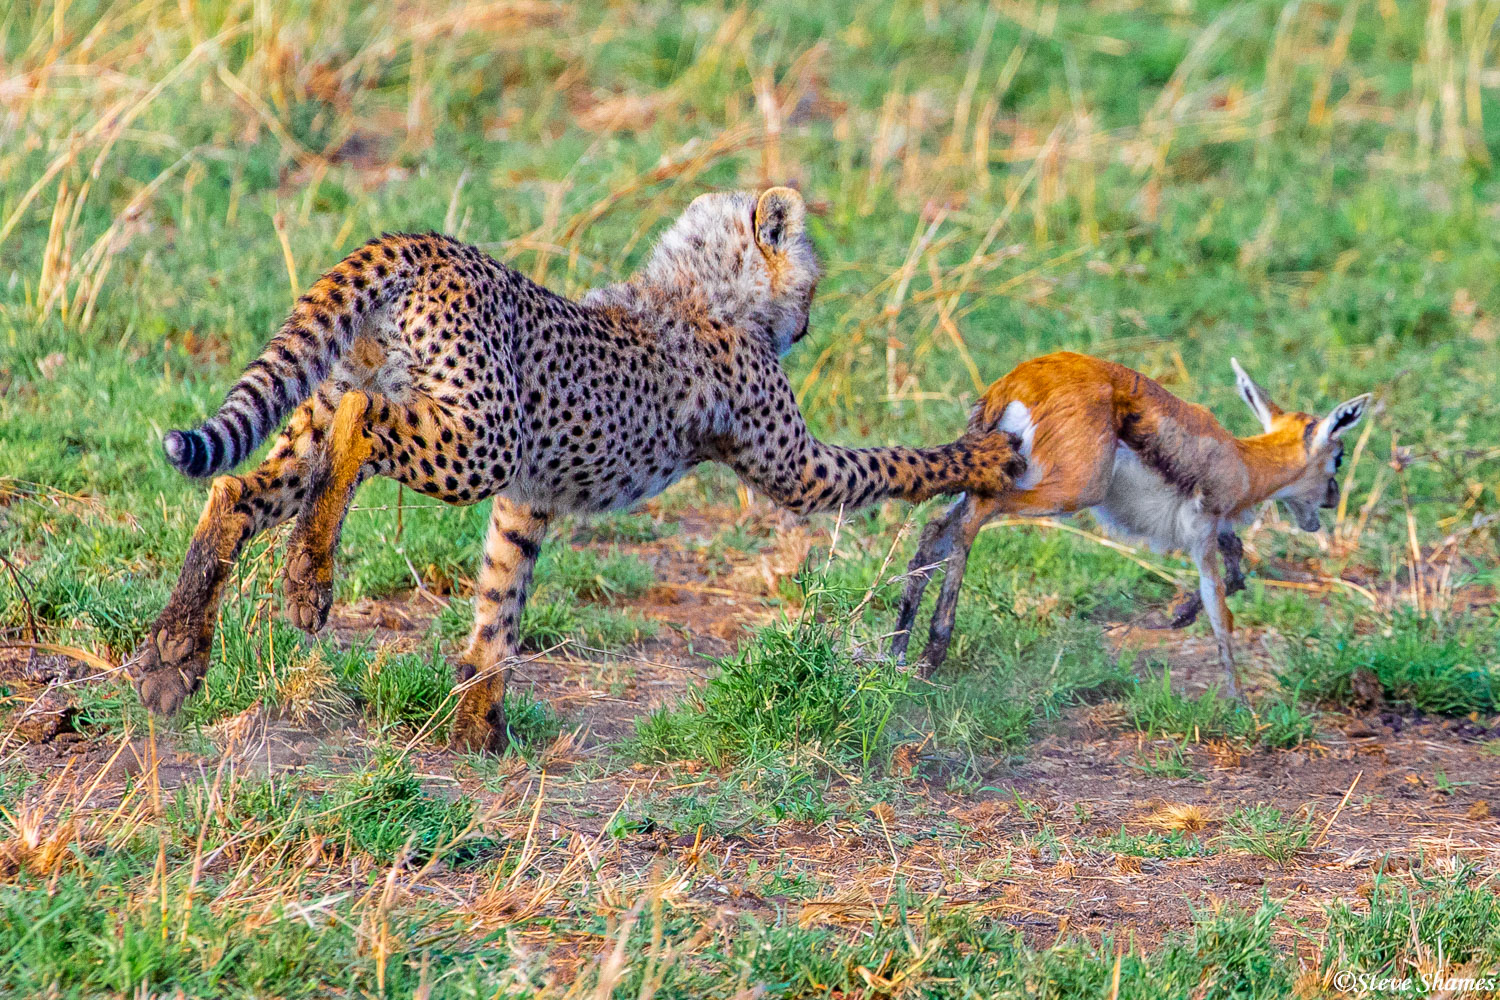 The cub is practicing his reach out and trip maneuver. That's how they bring an animal down at full speed.